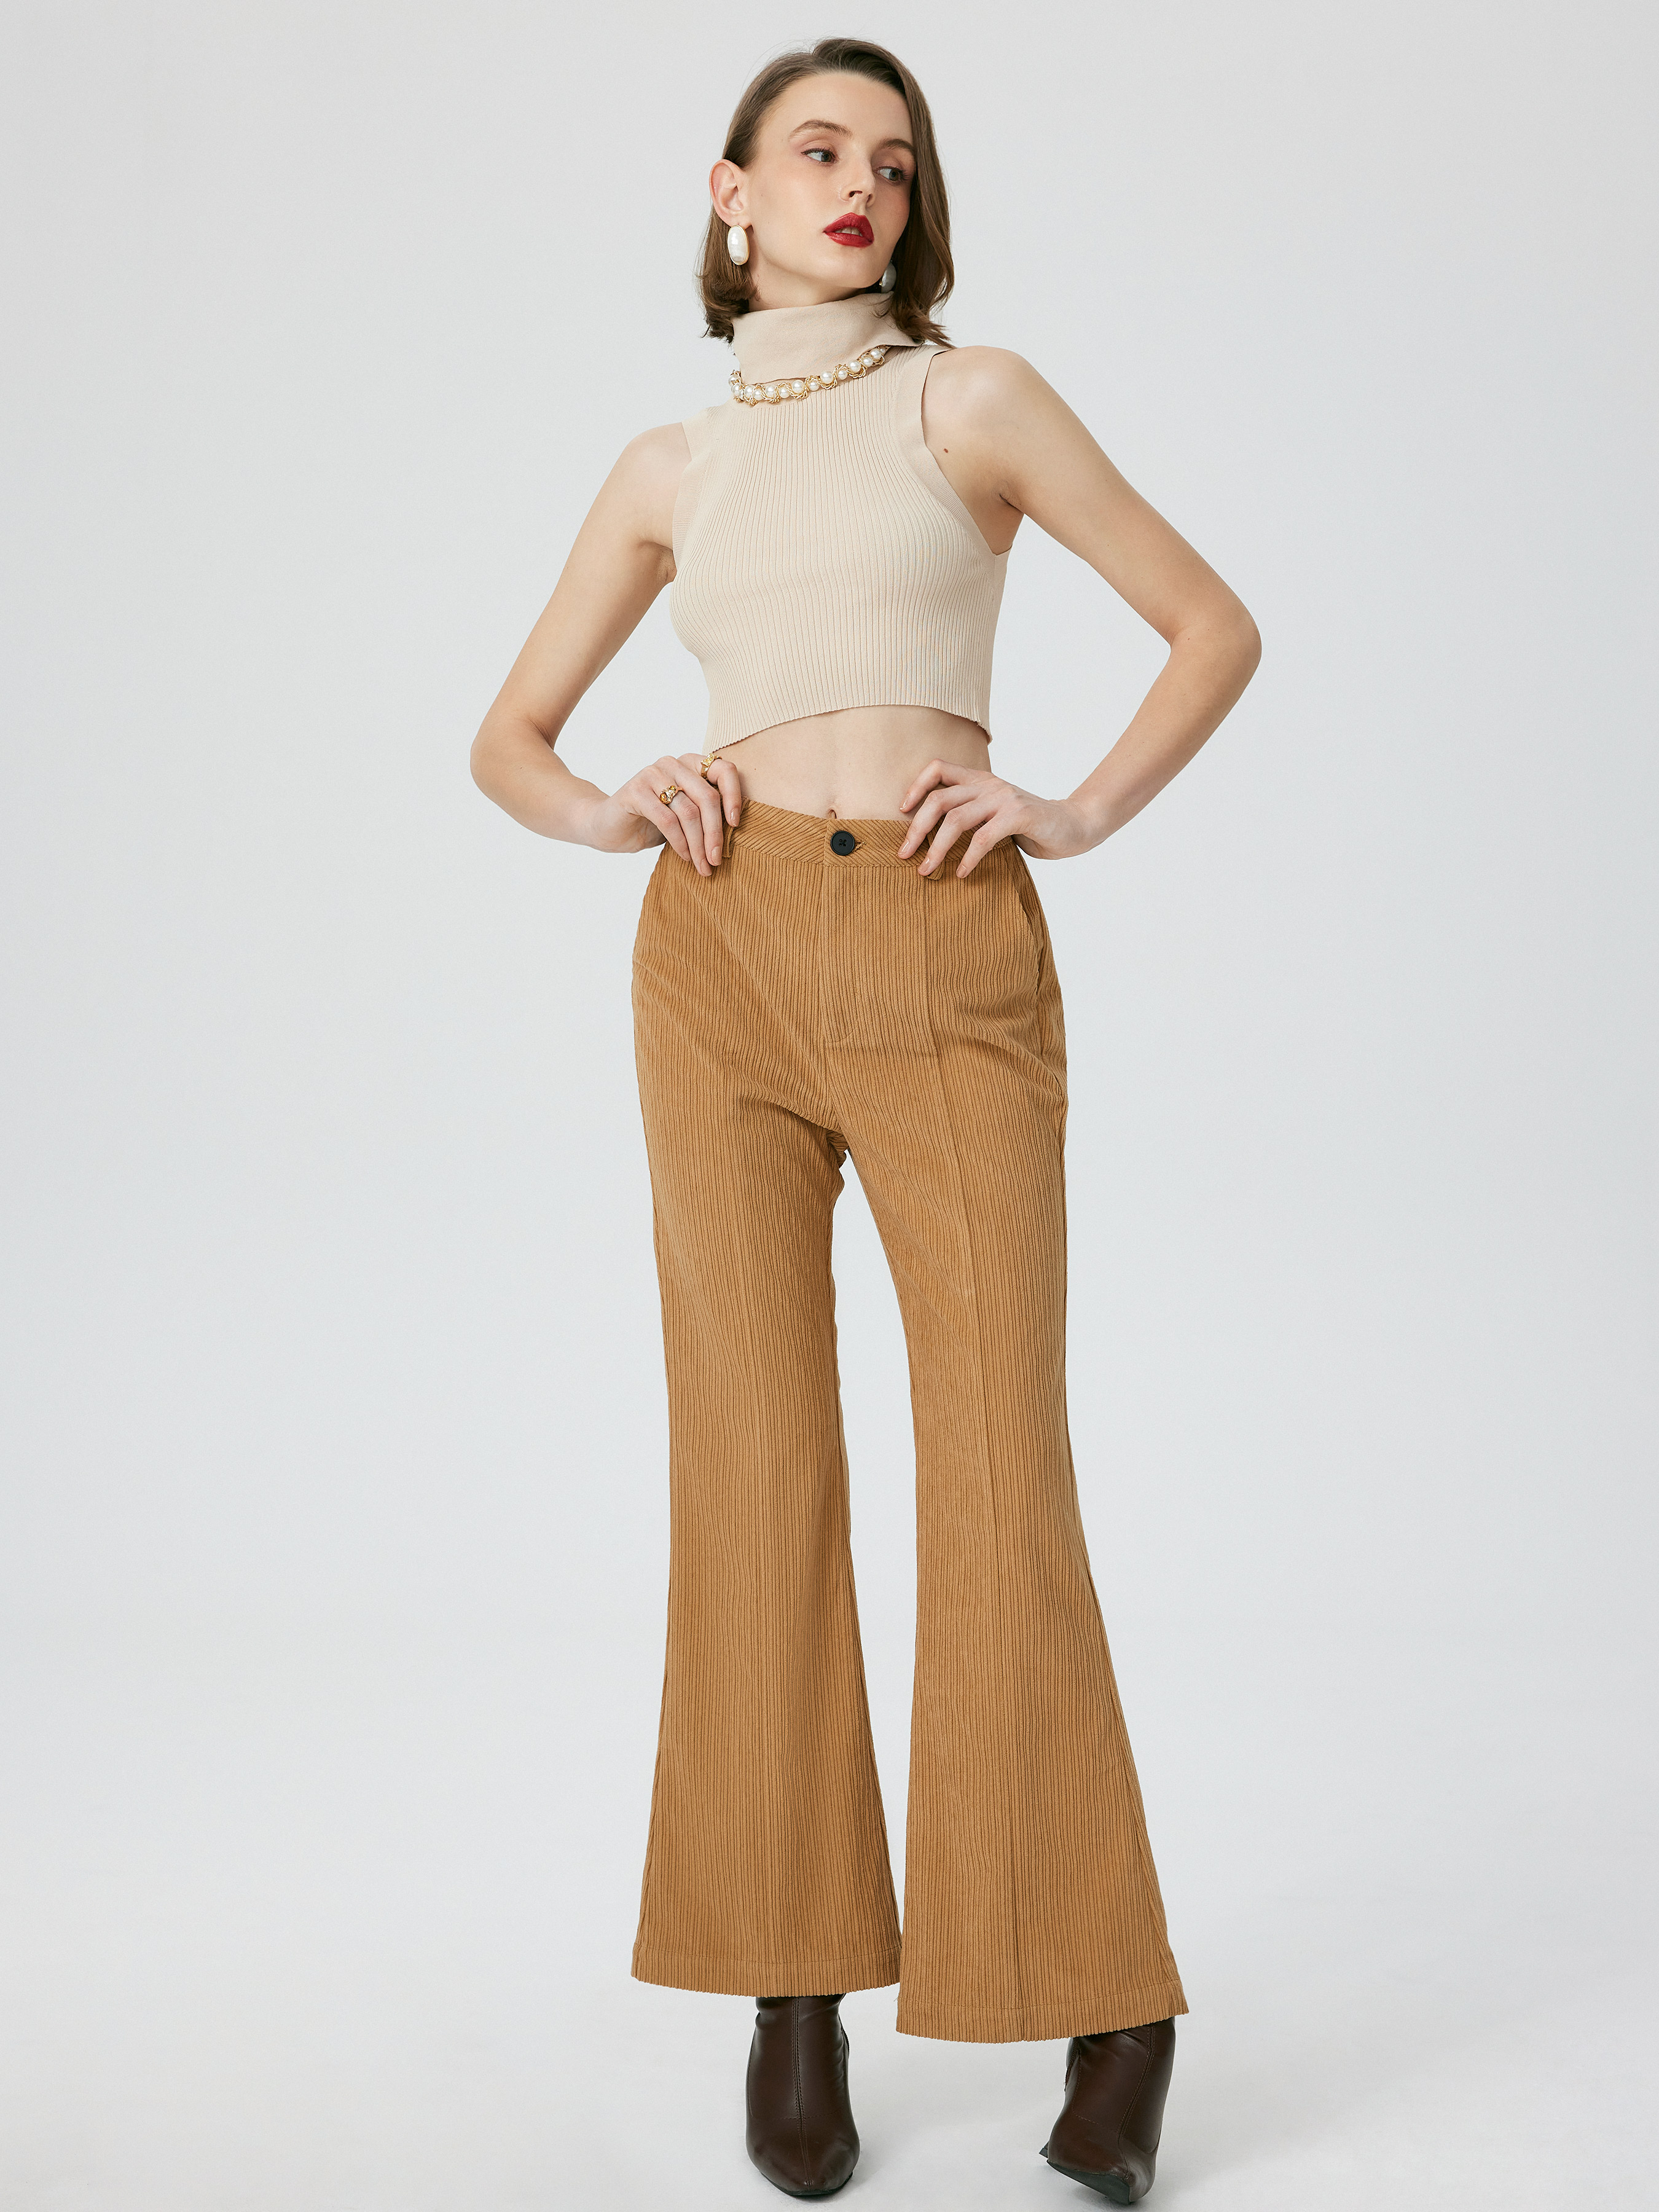 Brown Corduroy Flared Trousers - Cider